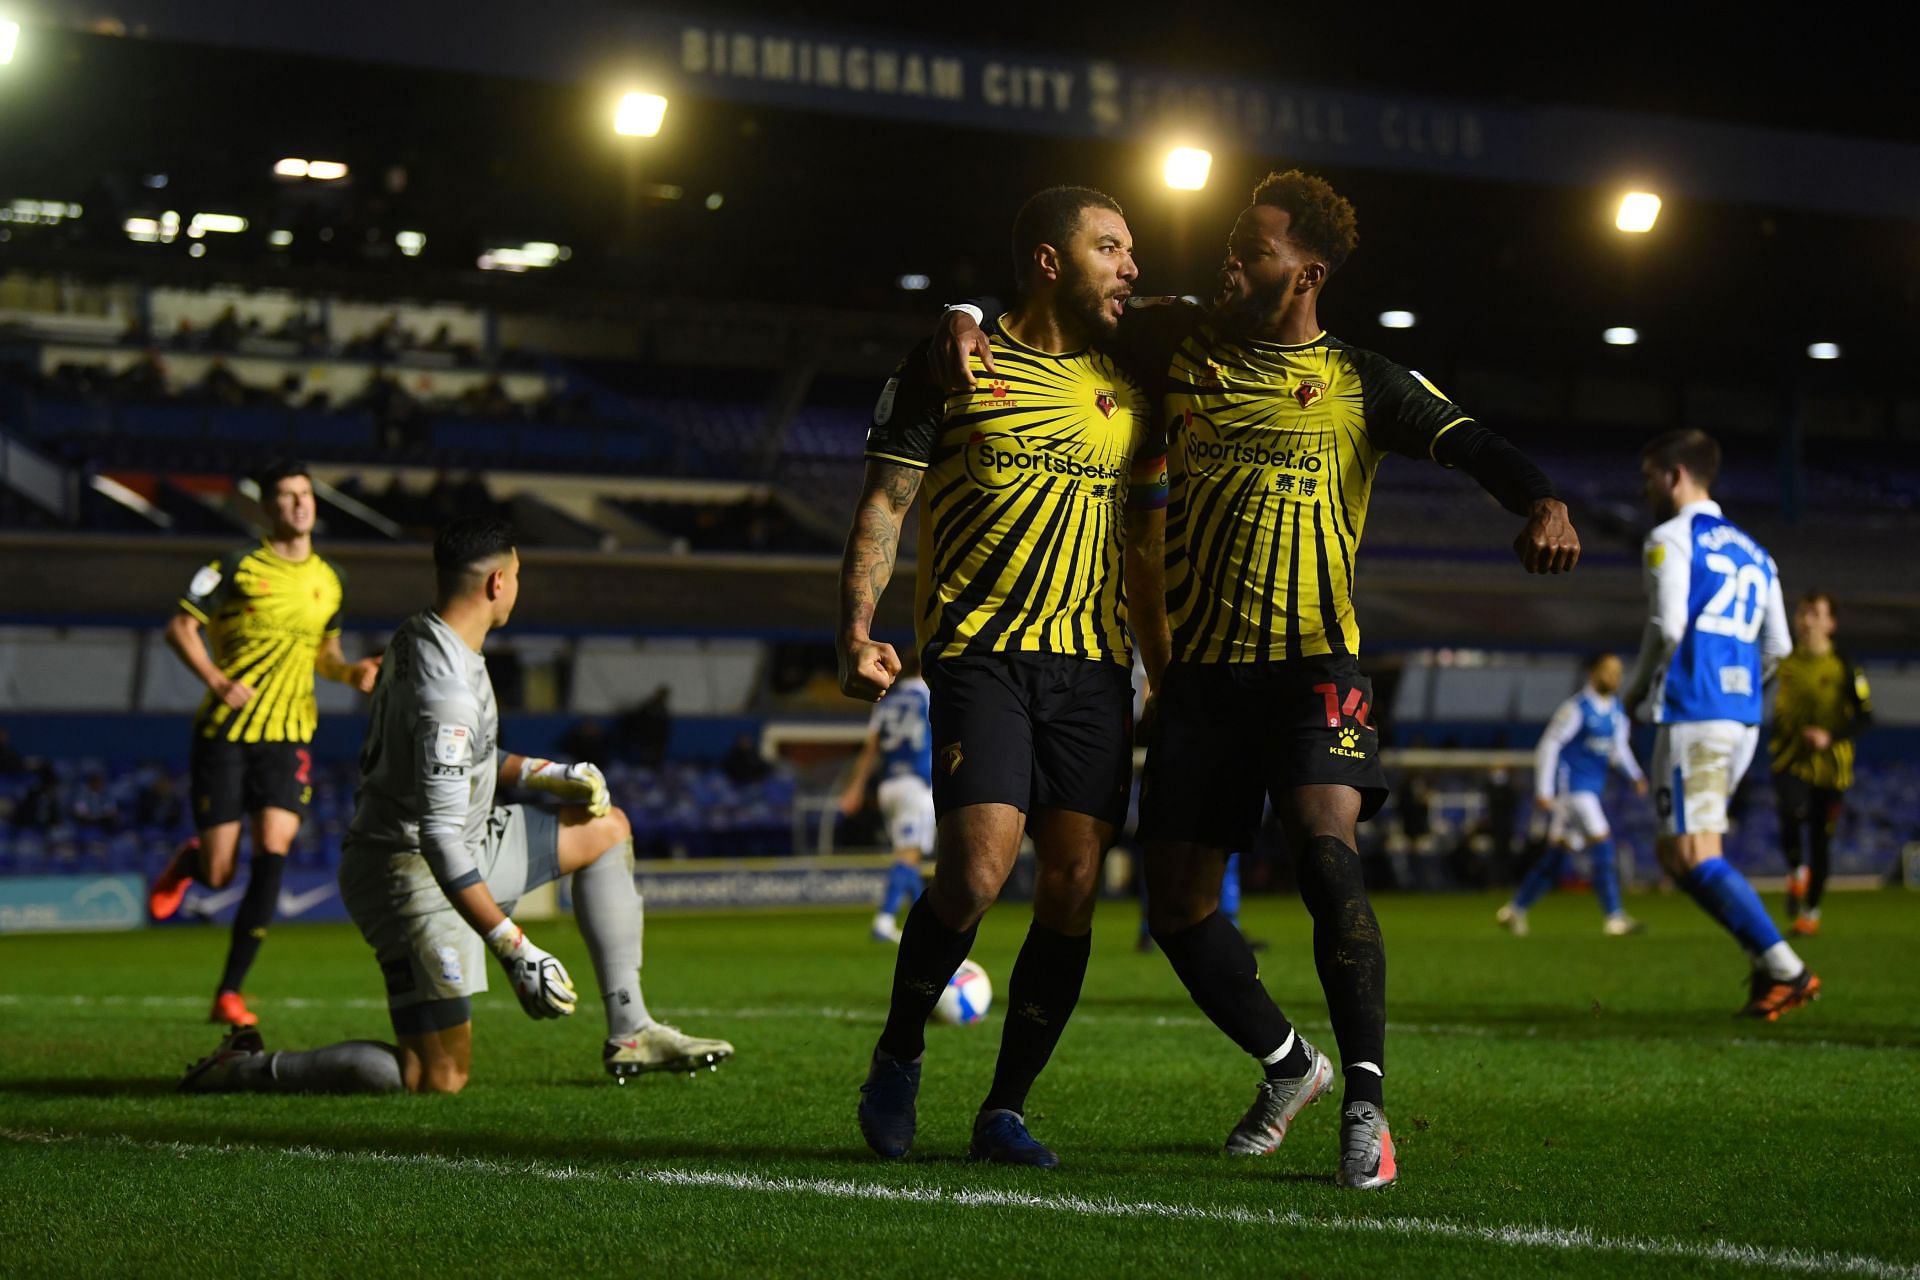 Birmingham City and Watford face off on Tuesday